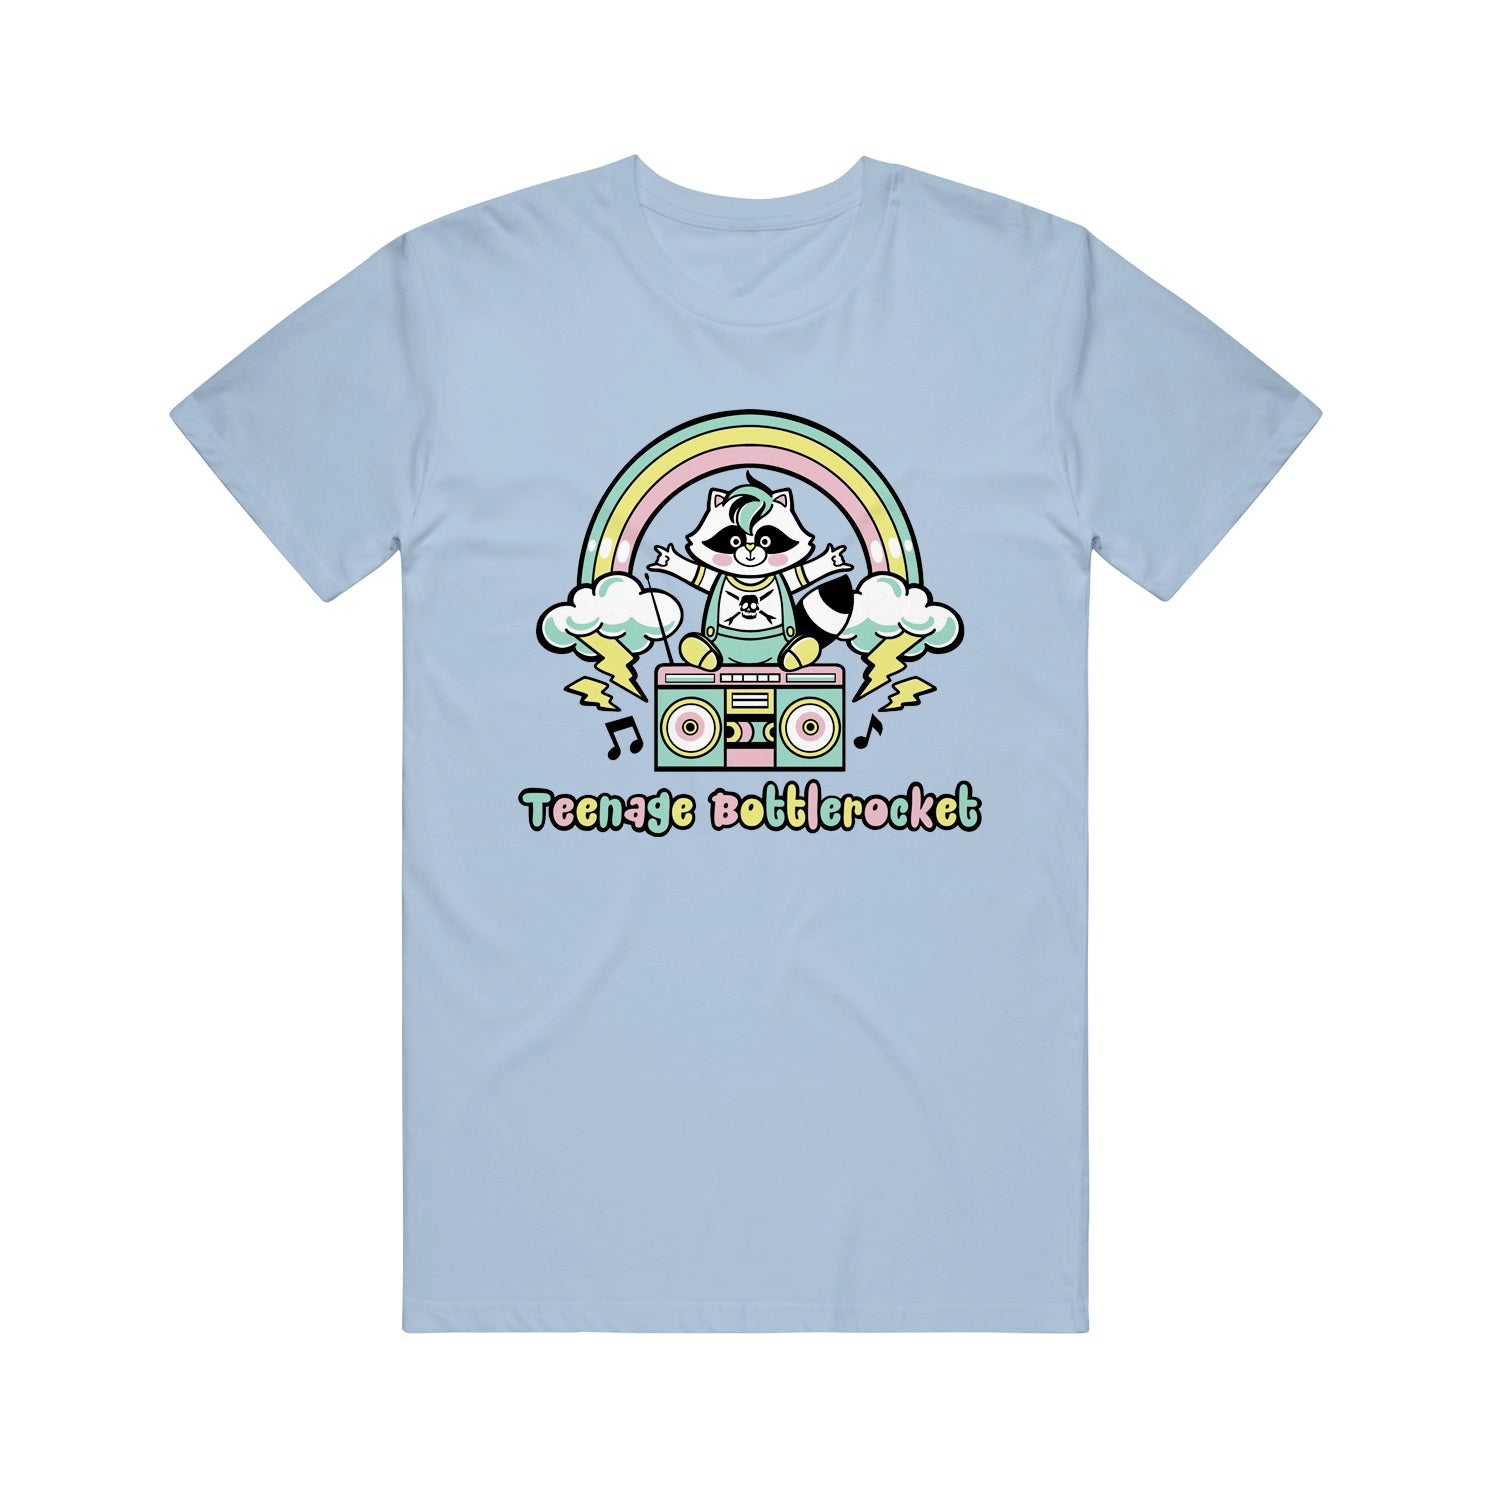 Image of a light blue tshirt against a white background. The center of the shirt has a colorful graphic of a raccoon sitting on top of a boombox. There is a rainbow with clouds at the end of the rainbow, shooting lightning bolts out. This is above the raccoon's head. Below the boombox in blue, pink, and yellow alternating colors are the words teenage bottlerocket. There are black music notes coming out of the sides of the boombox. 